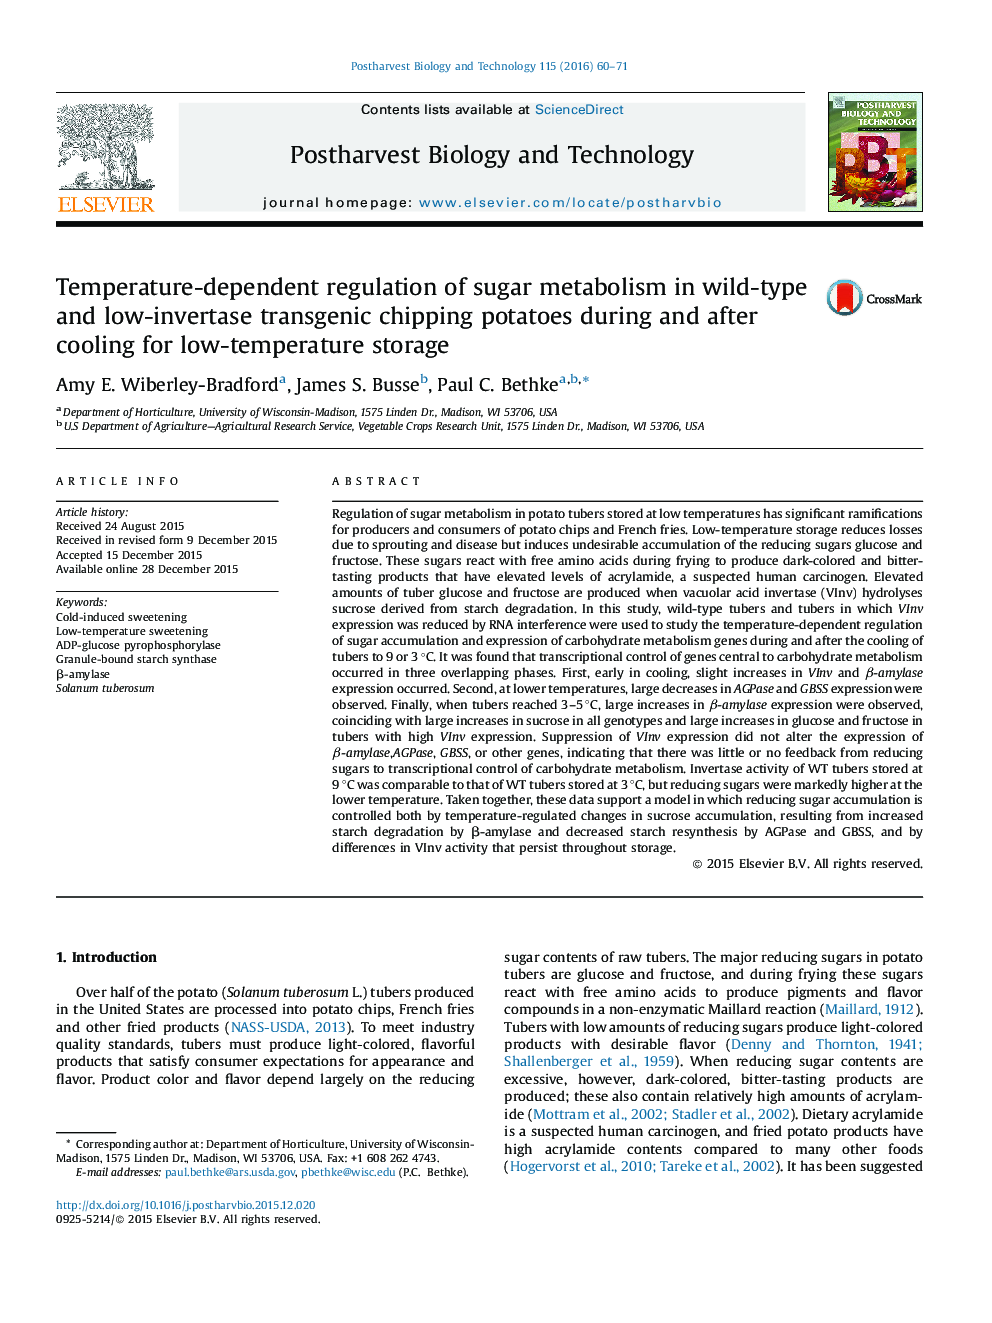 Temperature-dependent regulation of sugar metabolism in wild-type and low-invertase transgenic chipping potatoes during and after cooling for low-temperature storage